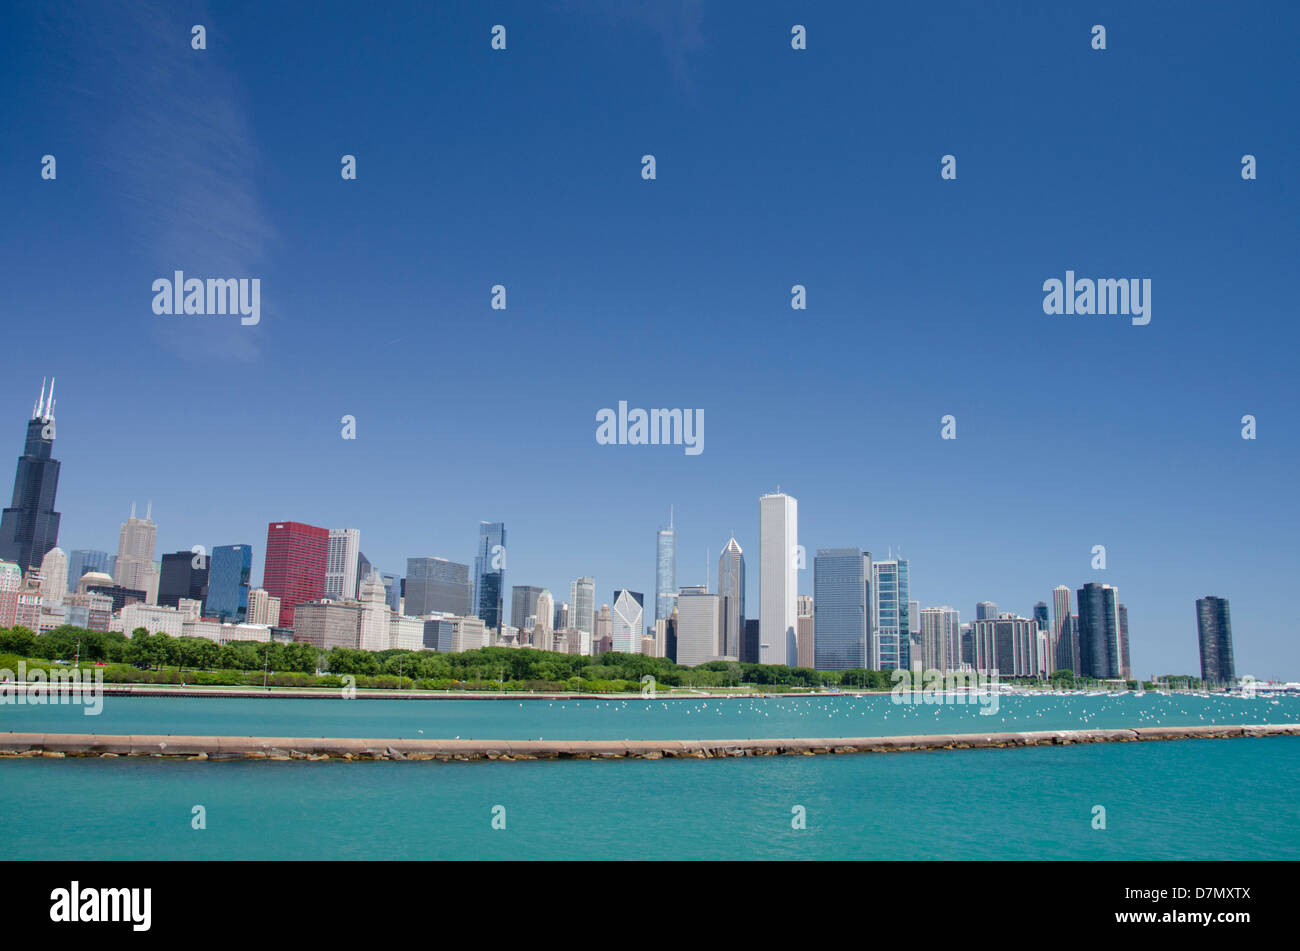 Illinois, Chicago. Downtown city skyline view of Chicago from Lake Michigan. Stock Photo